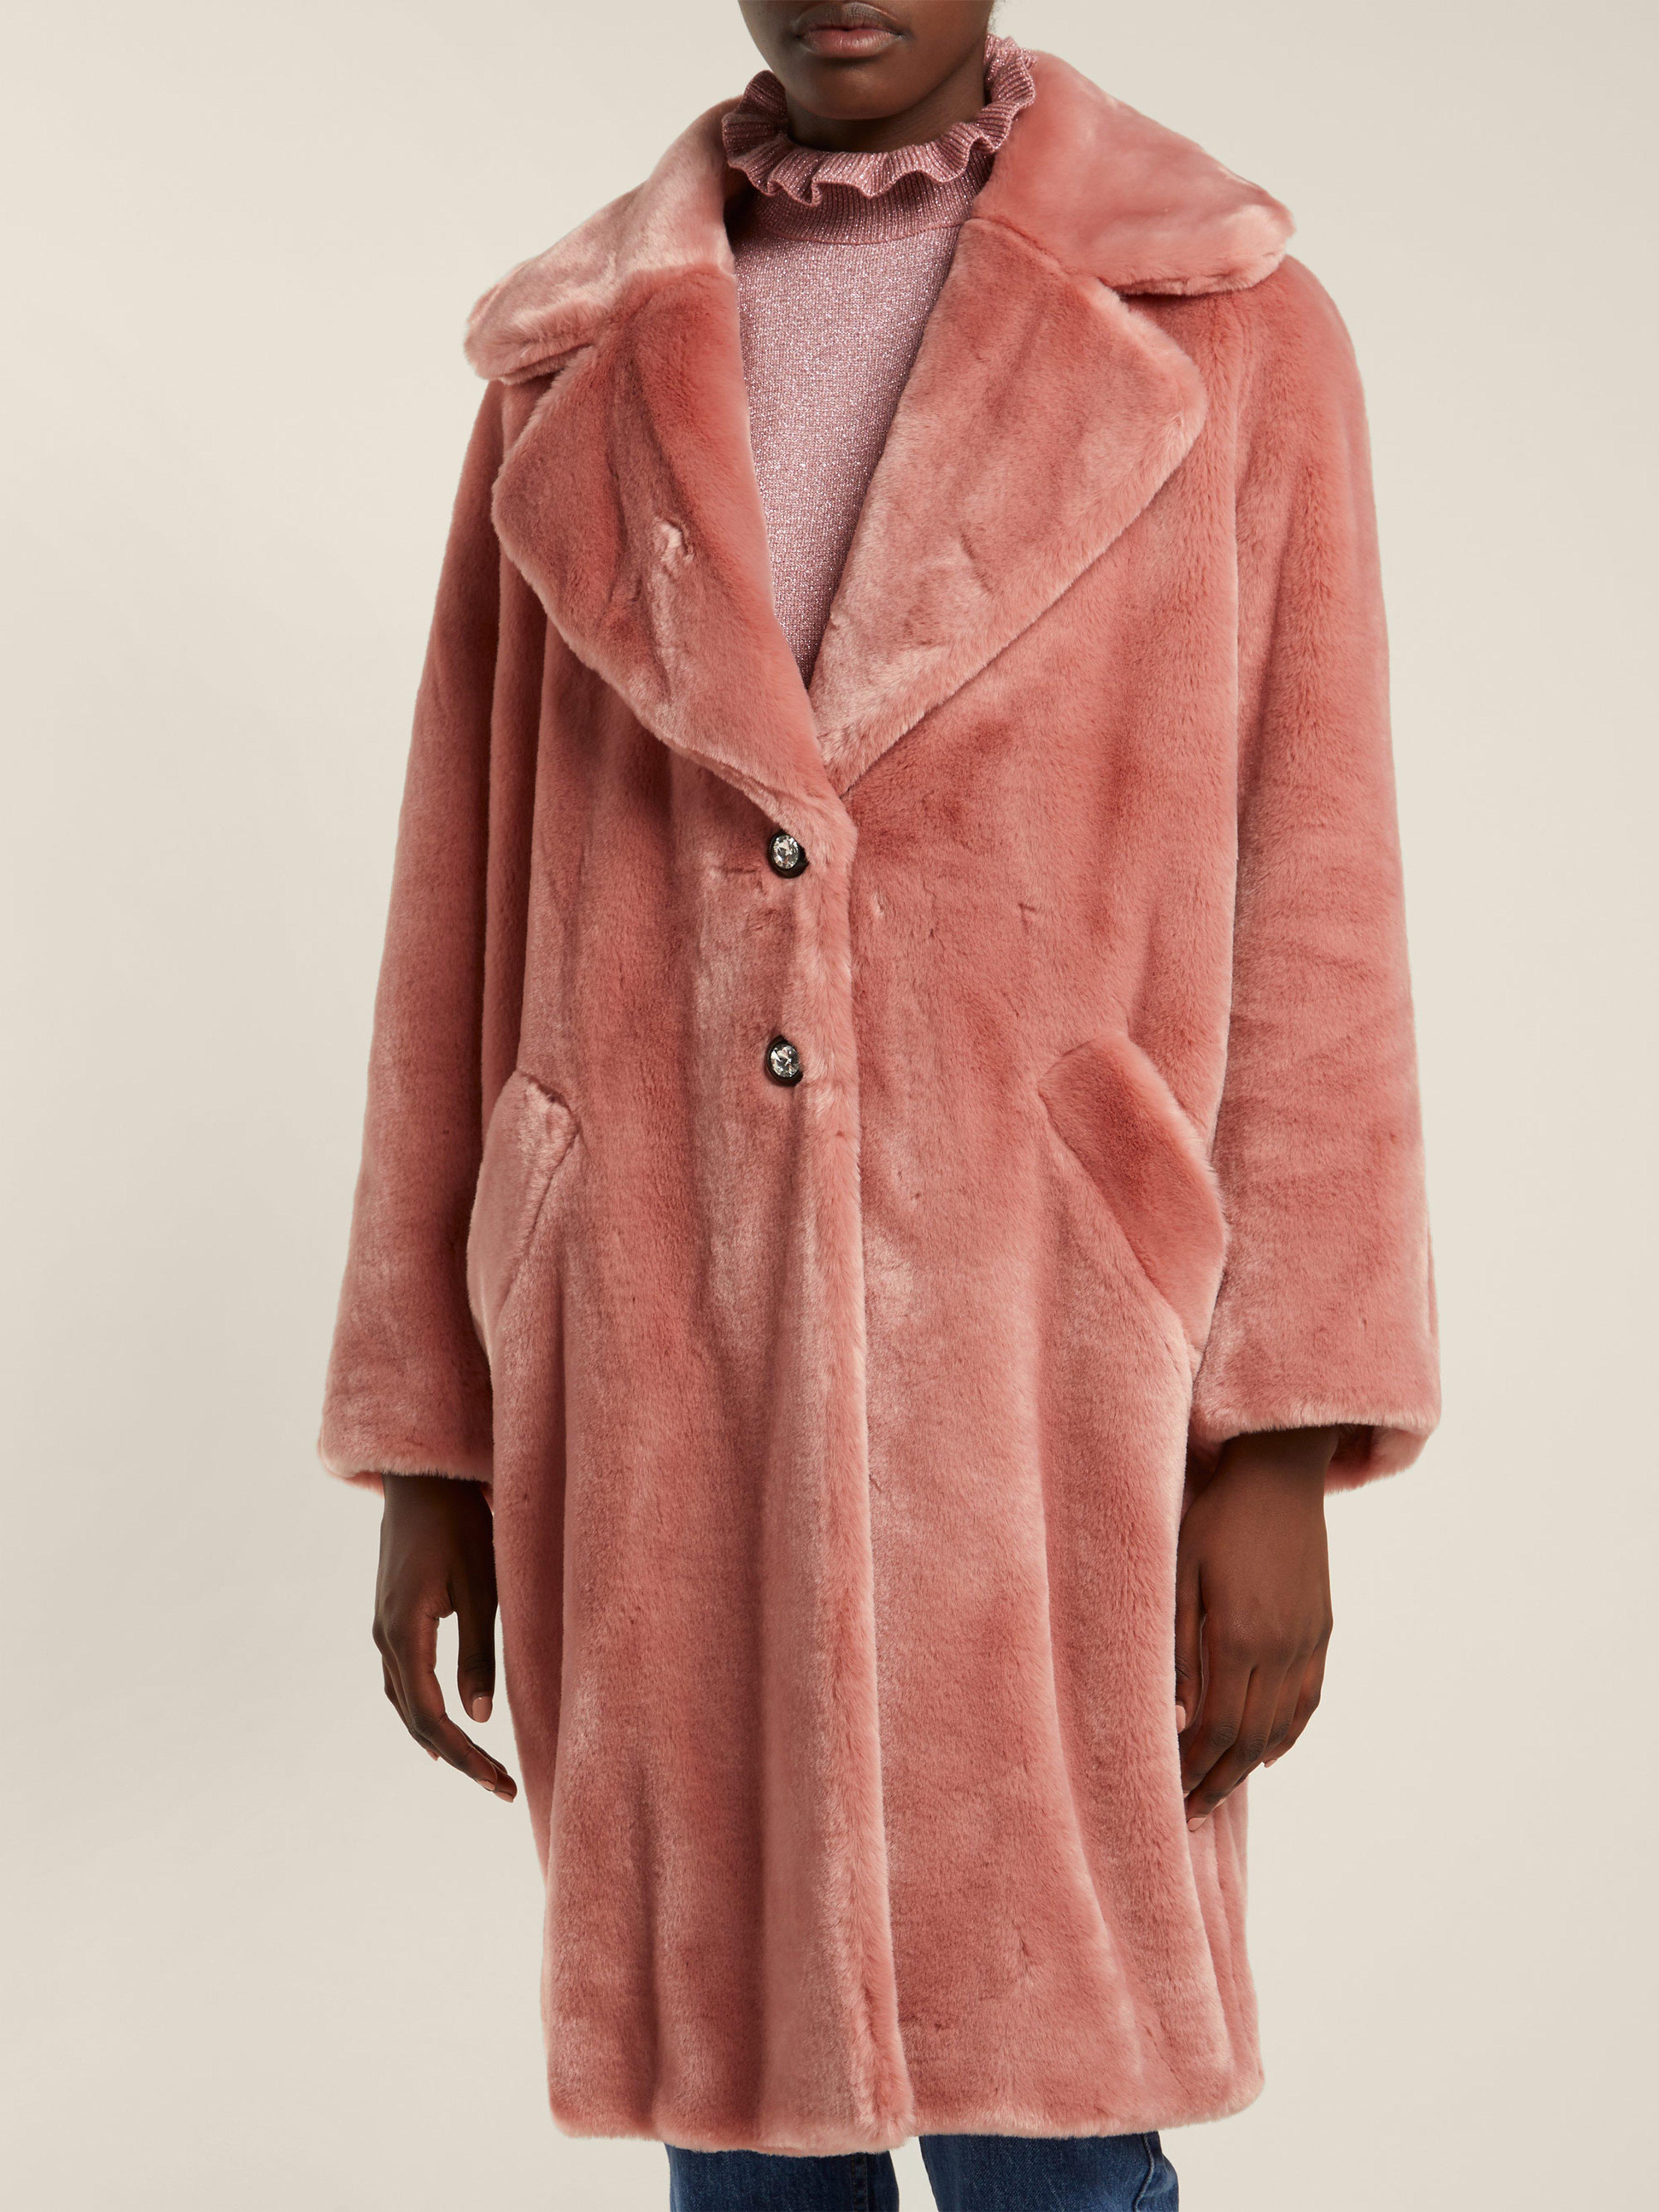 Shrimps Eamon Crystal Buttoned Faux Fur Coat in Pink - Lyst